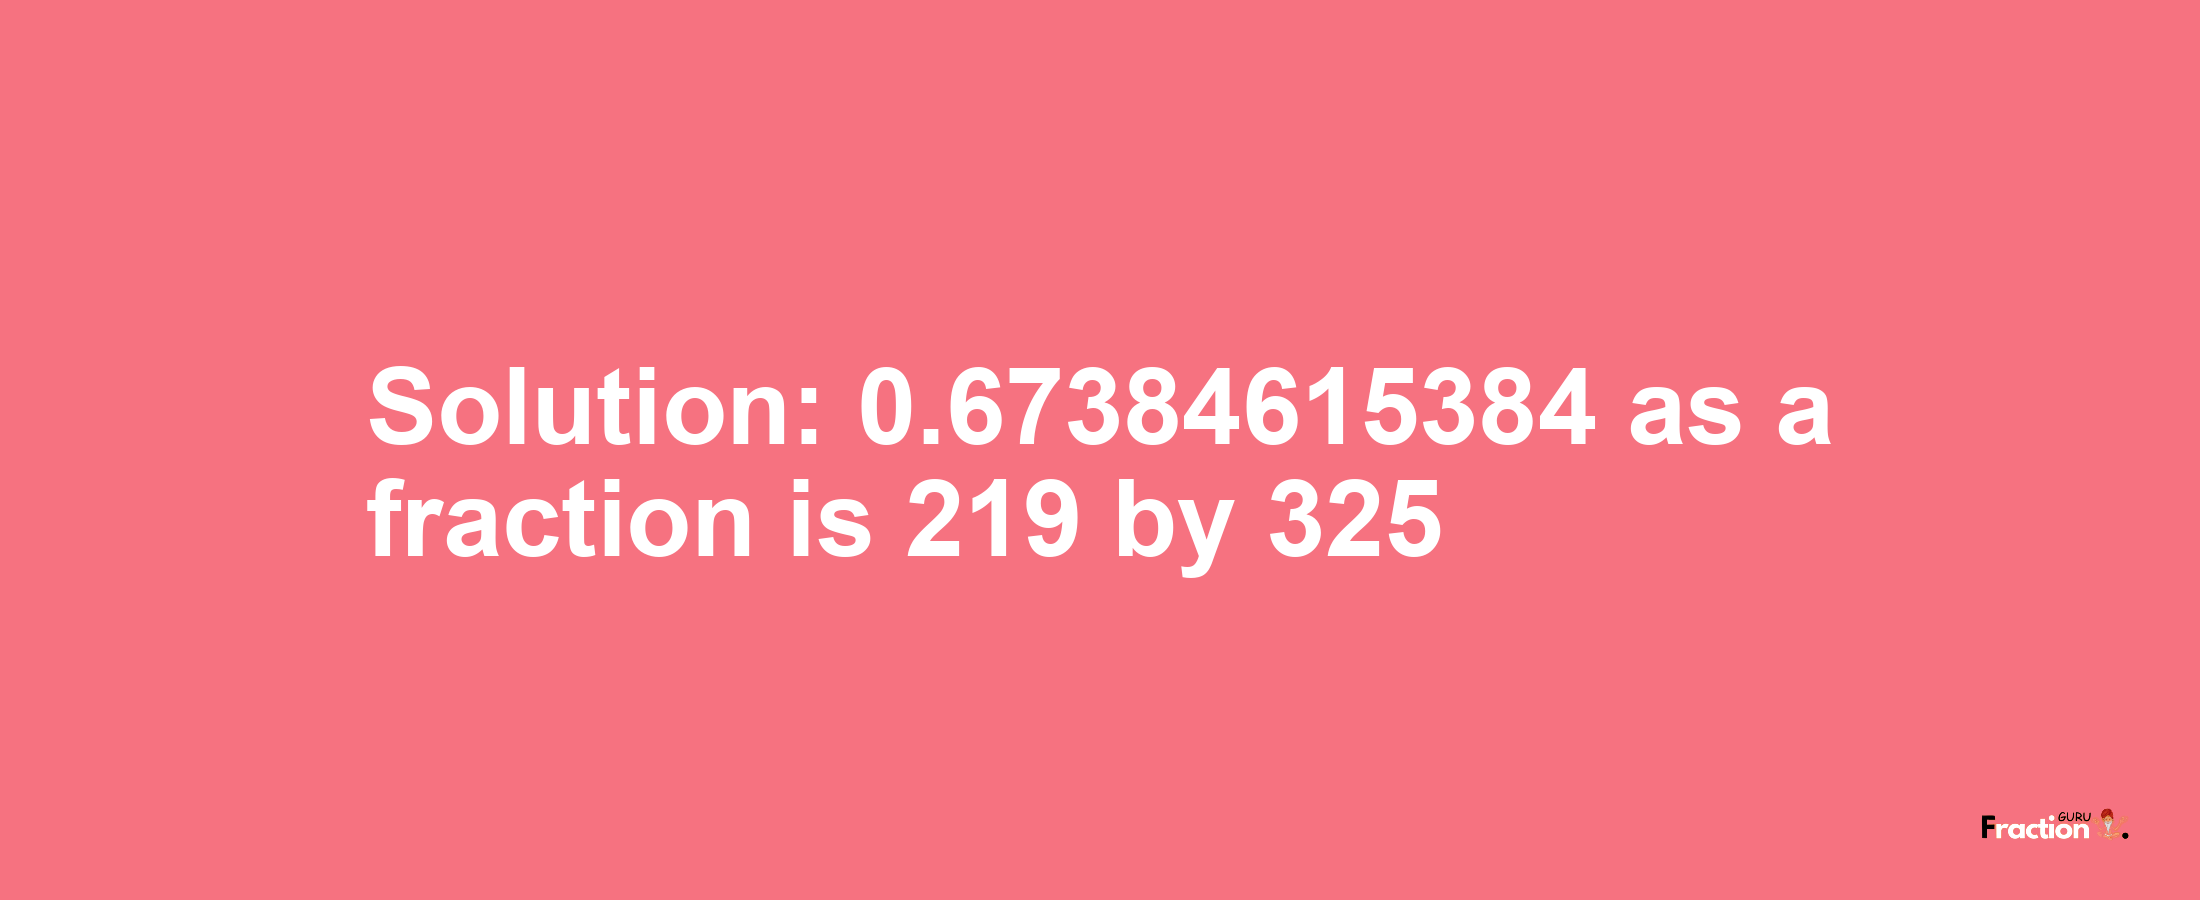 Solution:0.67384615384 as a fraction is 219/325